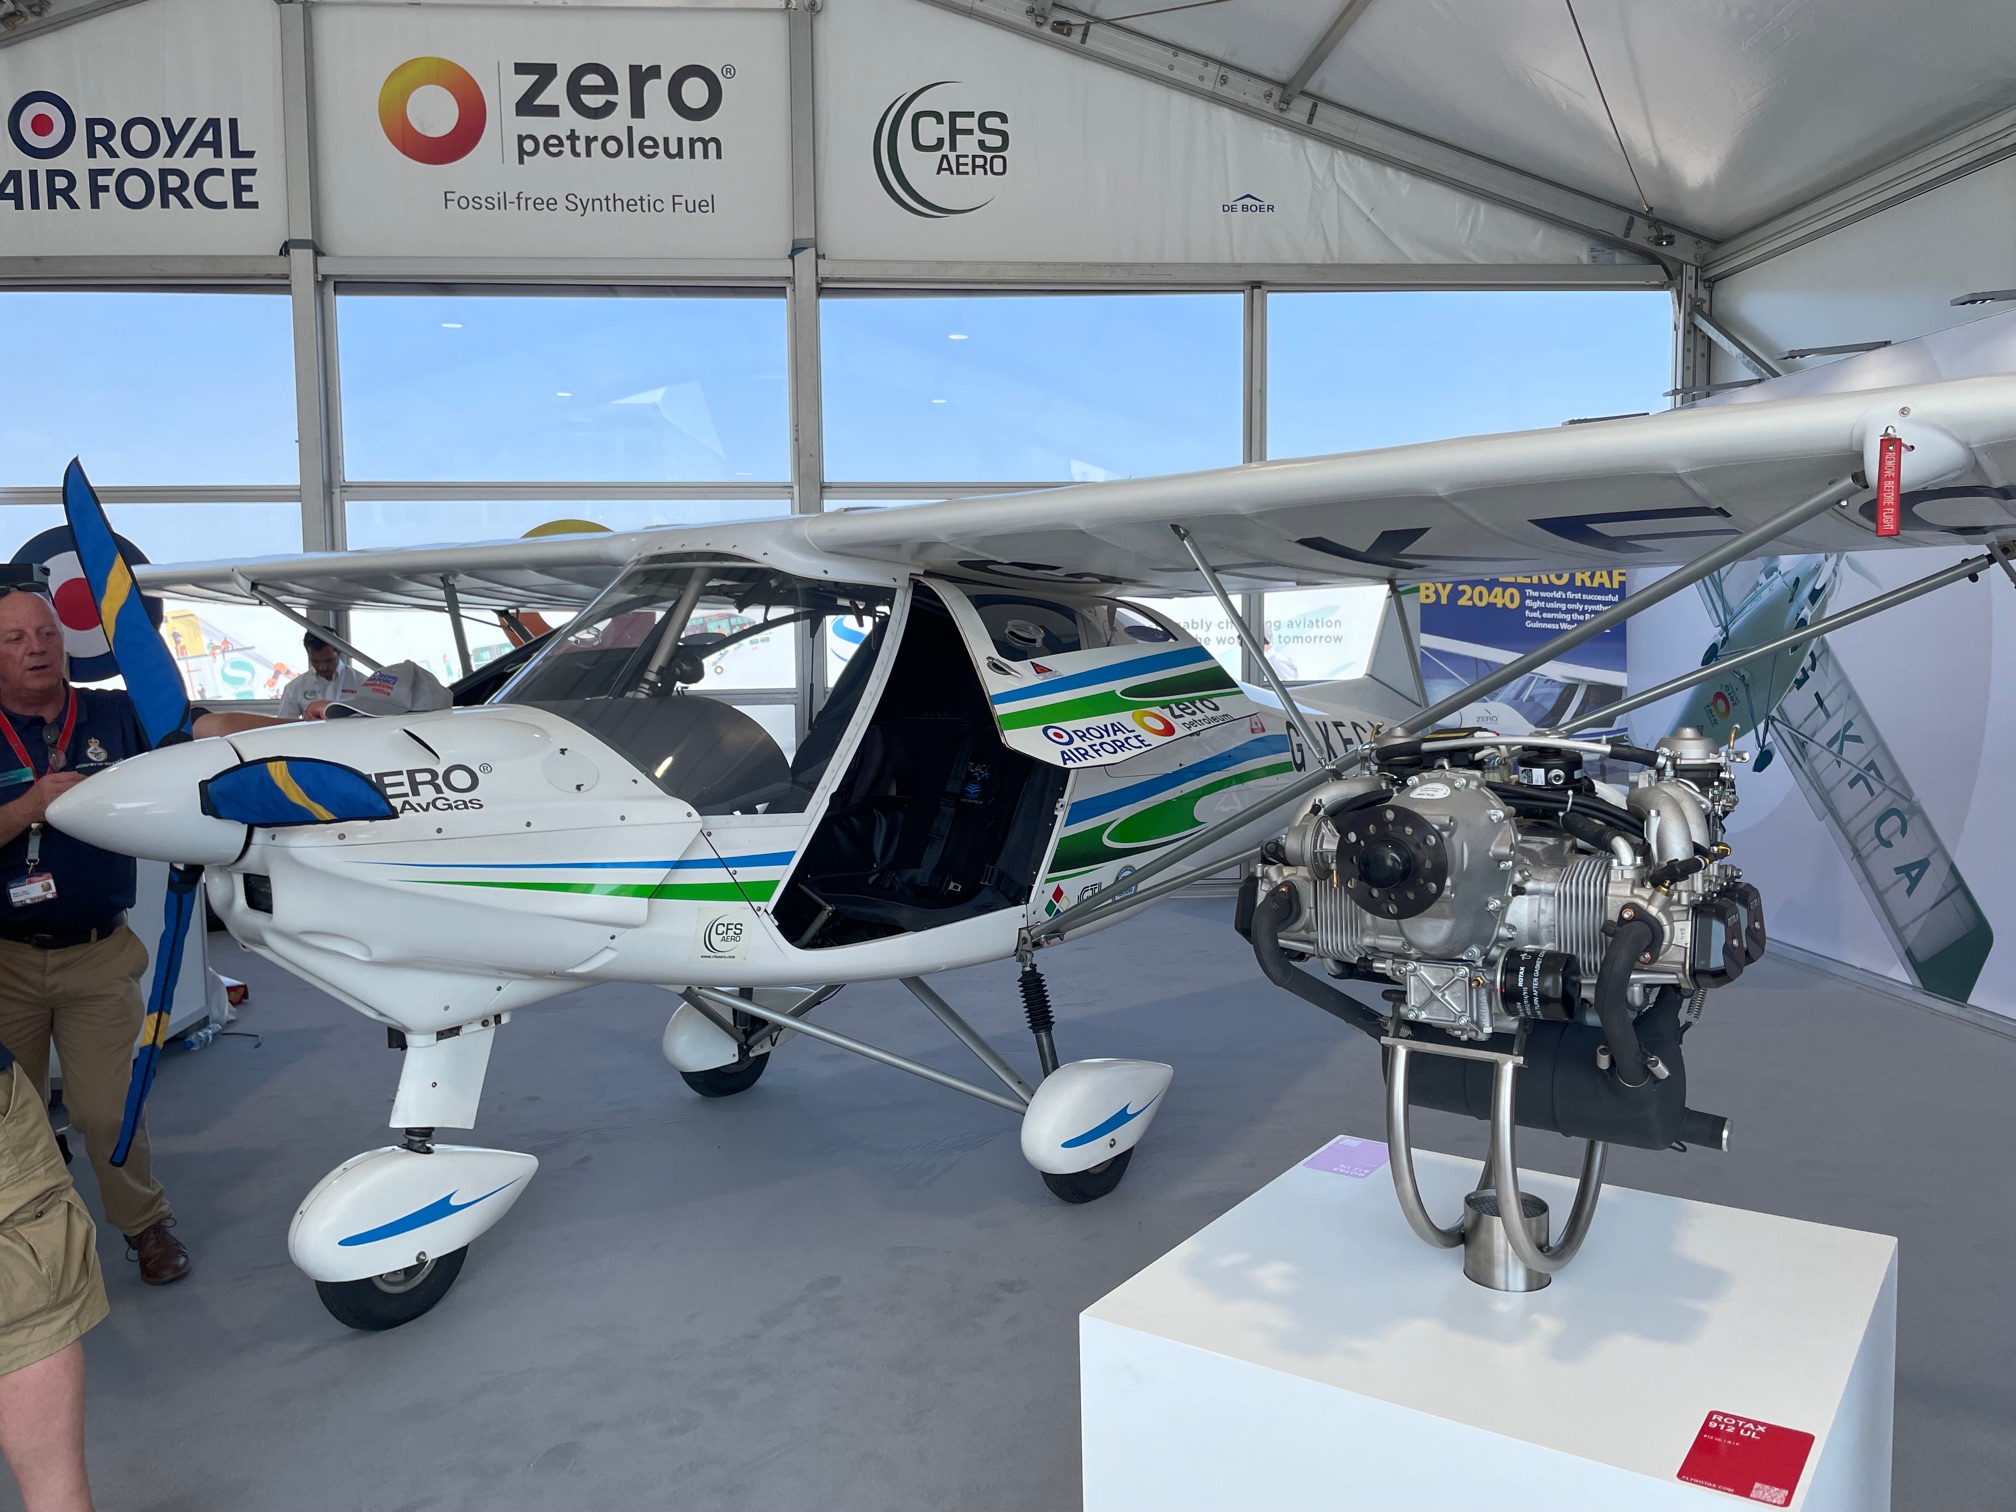 Image shows Ikarus microlight aircraft in showroom..